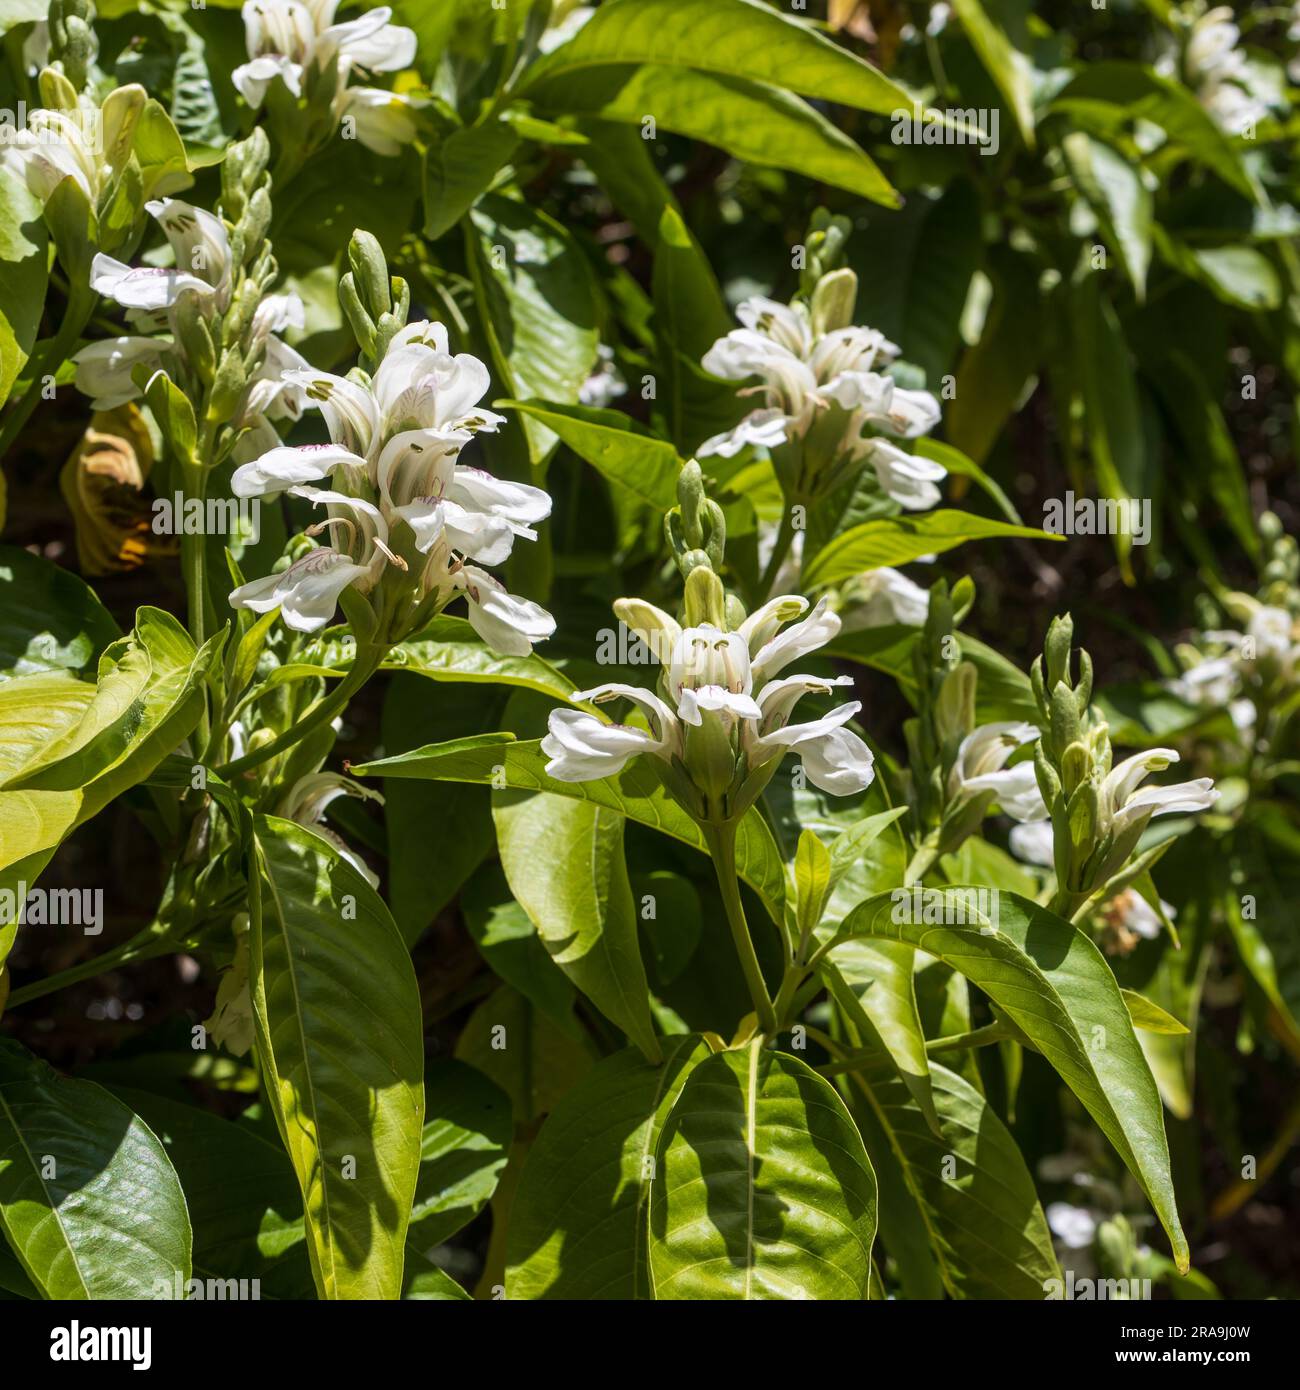 Justicia adhatoda flower and tree.This tree is near the home. Stock Photo